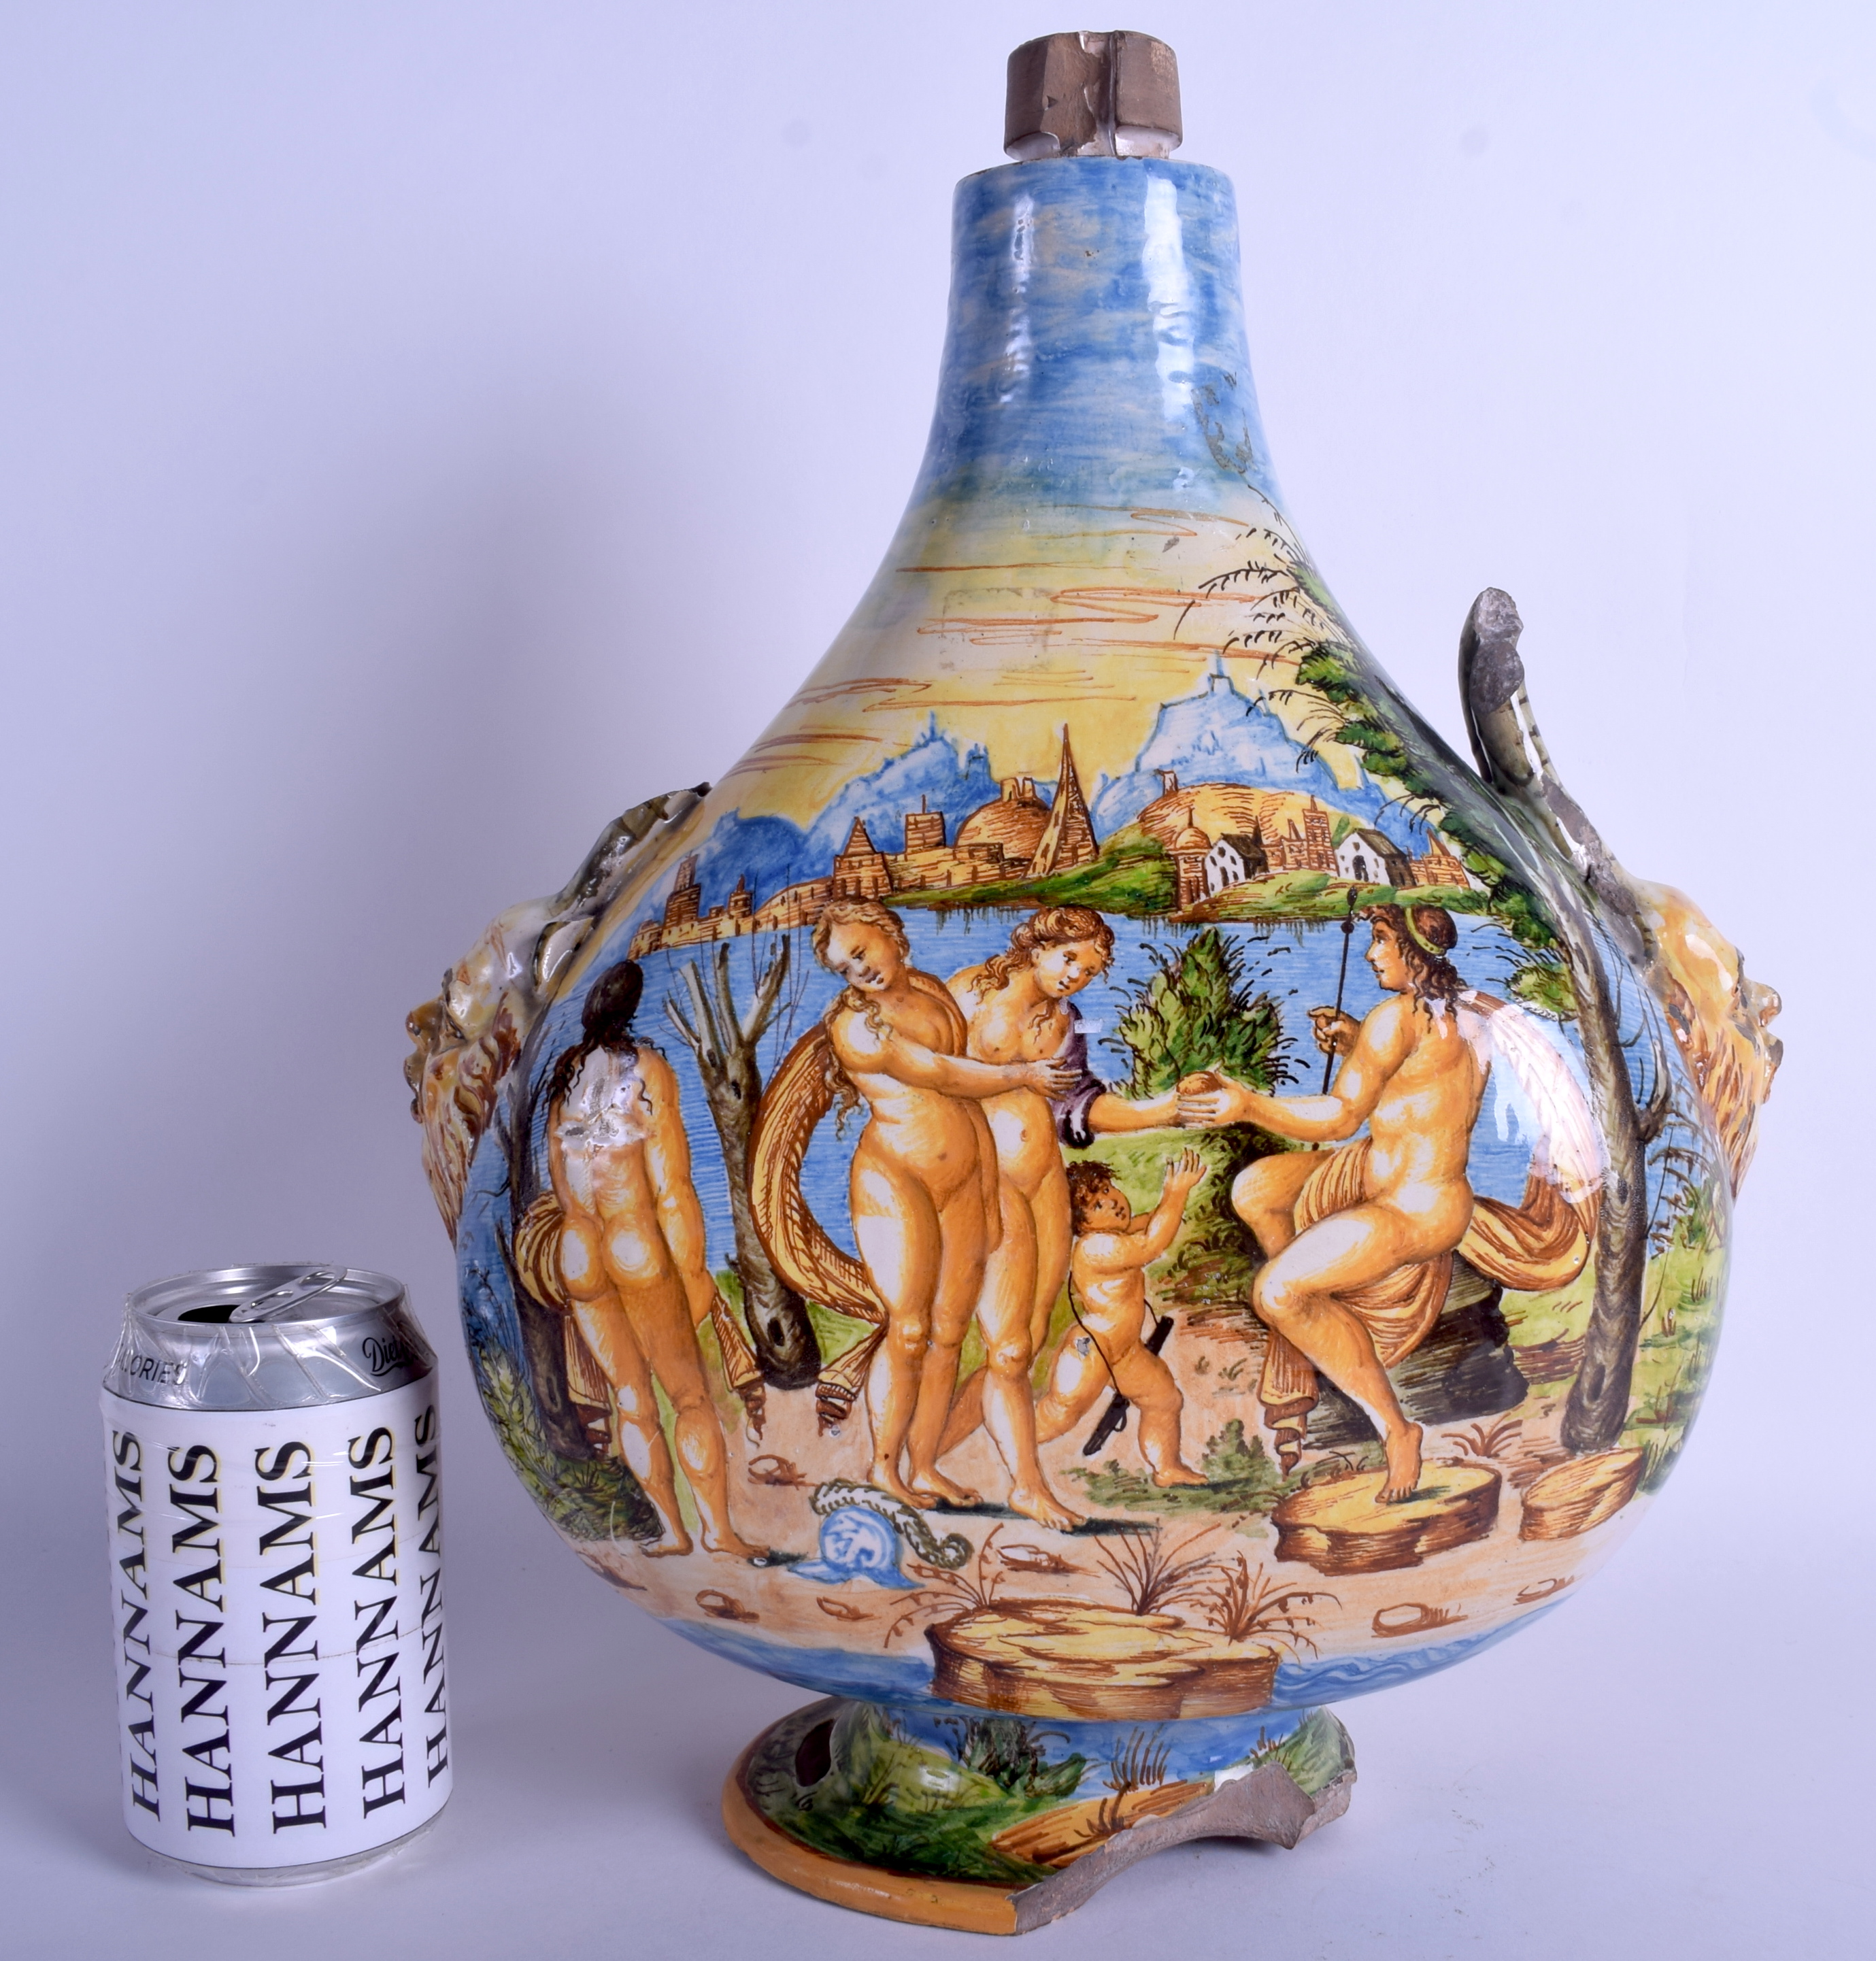 A LARGE EARLY ANTIQUE ITALIAN MAJOLICA FAIENCE PILGRIM VASE possibly Urbino, painted with classical